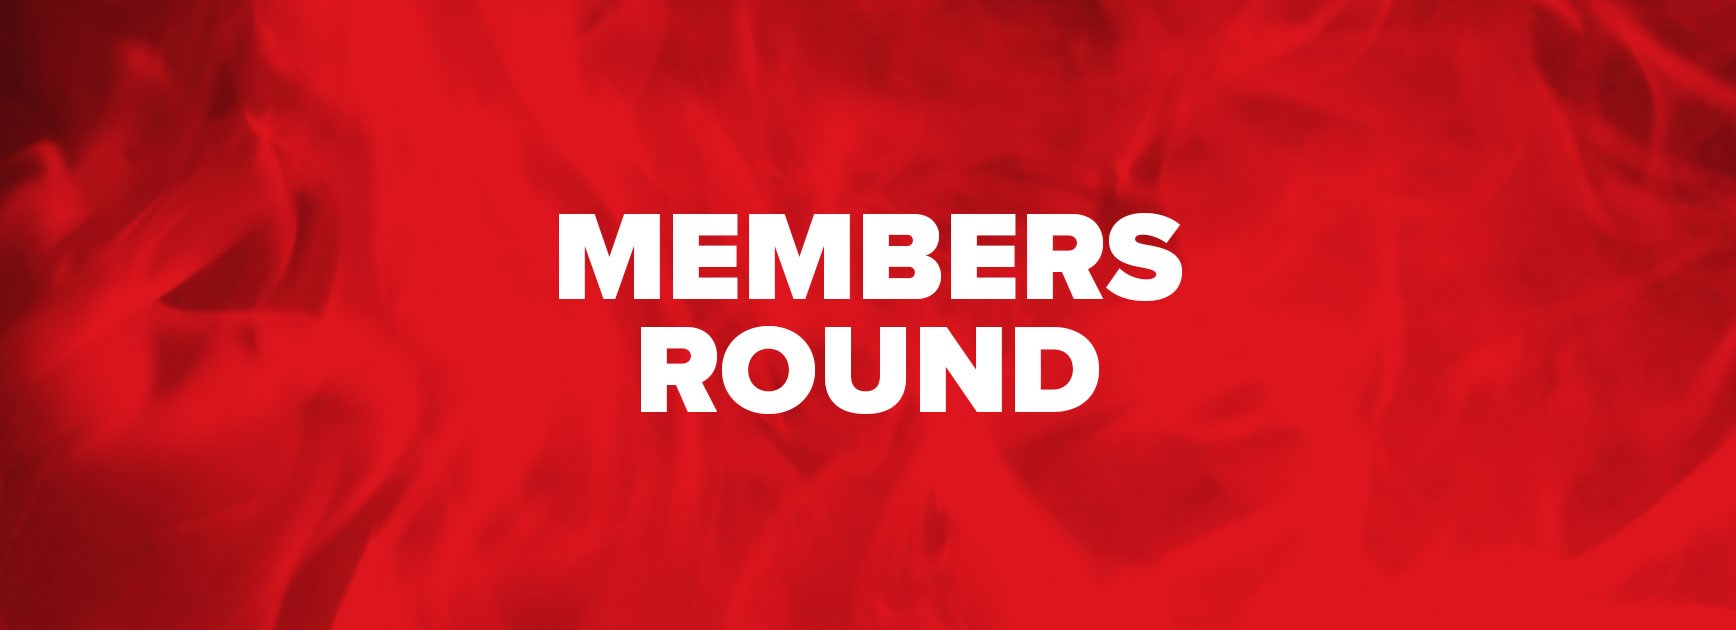 Round 14 is all about our members!